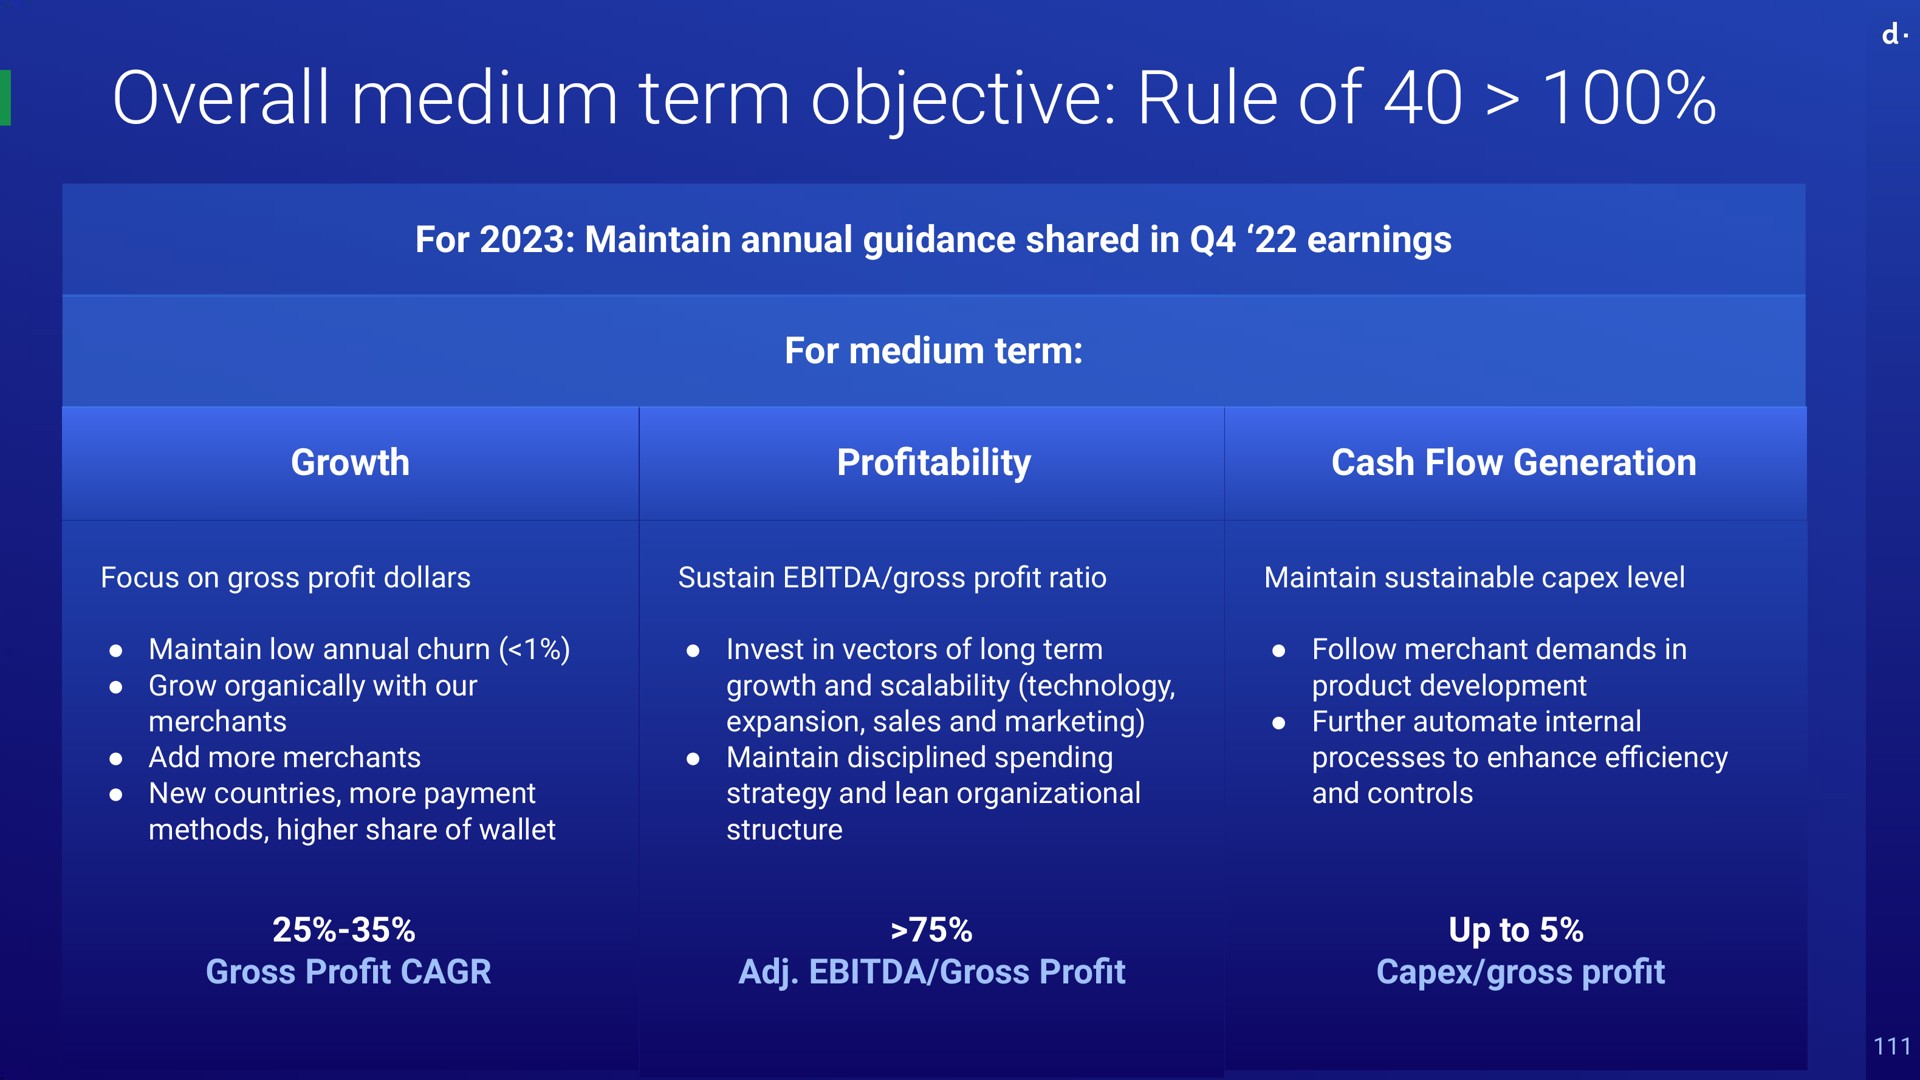 overall medium term objective rule of for maintain annual guidance shared in earnings for medium term growth pro cash flow generation focus on gross pro dollars maintain low annual churn grow organically with our merchants add more merchants new countries more payment methods higher share of wallet sustain gross pro ratio financial discipline low acquisition cost invest in vectors of long term emerging market costs net revenues growth and technology lean organization net revenues expansion sales and marketing maintain disciplined spending strategy and lean organizational structure gross pro gross pro maintain sustainable level follow merchant demands in product development further internal processes to enhance and controls we just show rile of up to gross pro profitability profit profit go efficiency profit profit profit an | dLocal